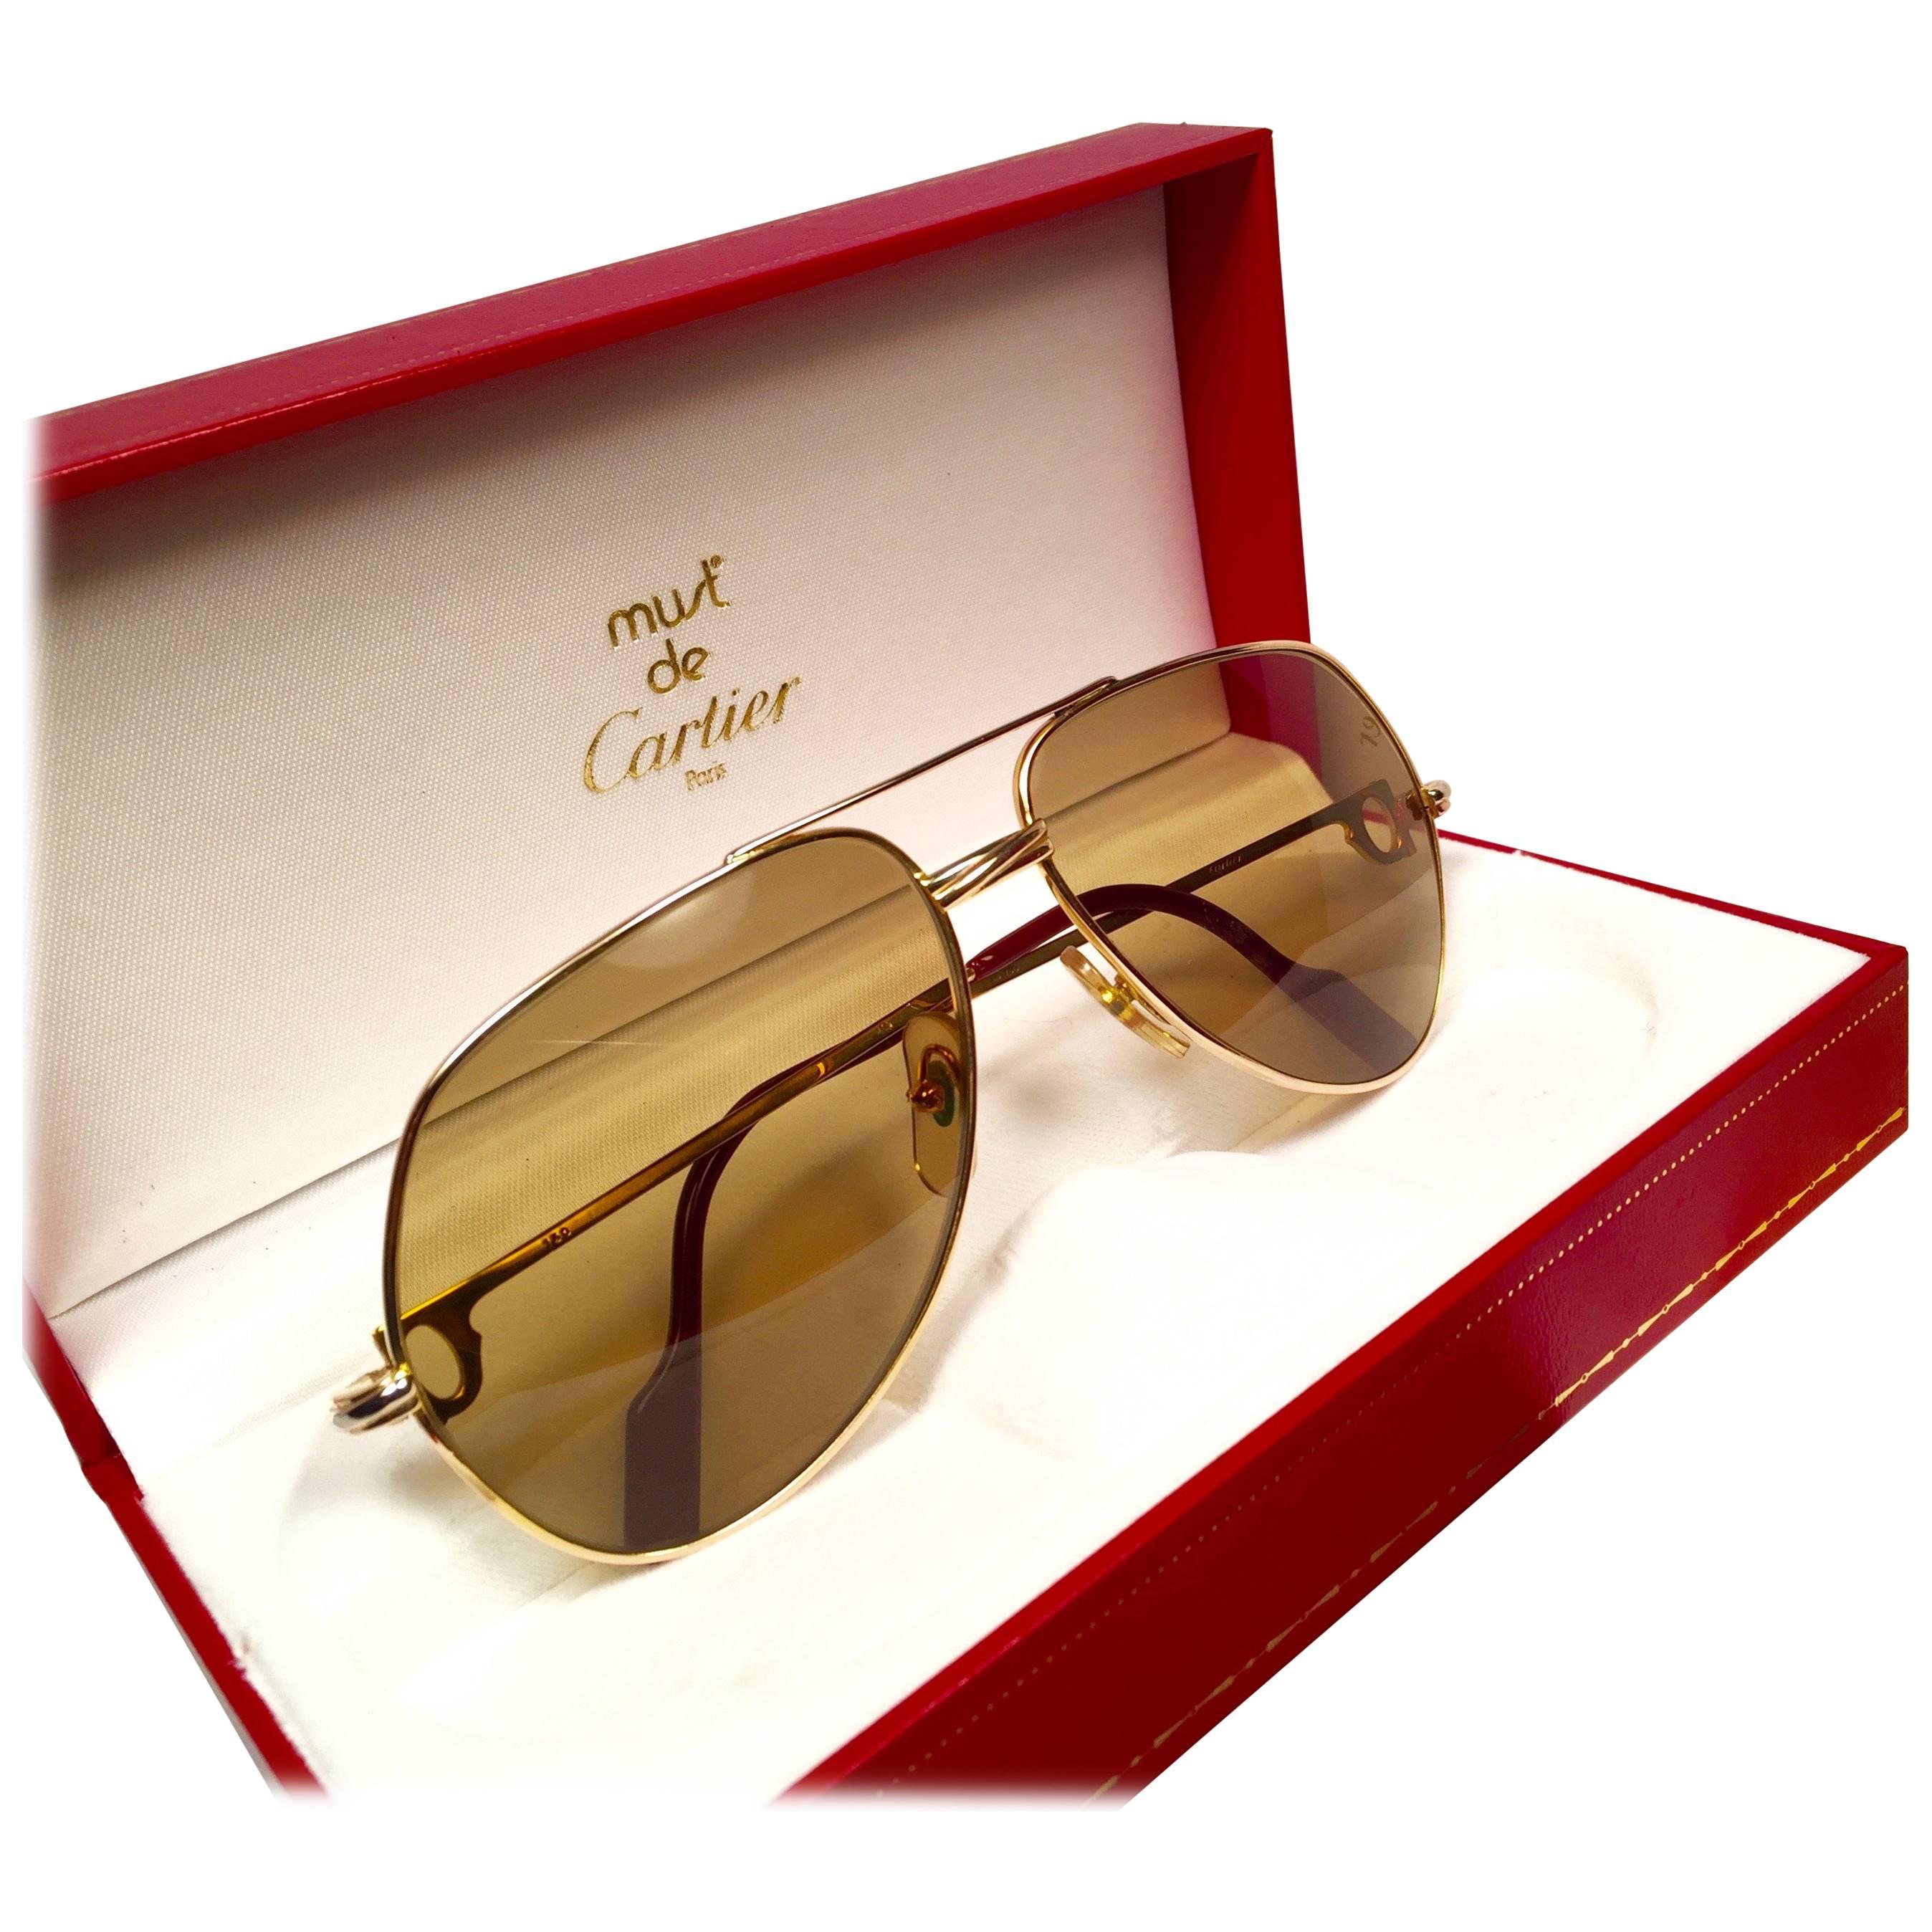 New Cartier Ultra Rare Vendome 18K 750 Gold Filled Sunglasses Made in France